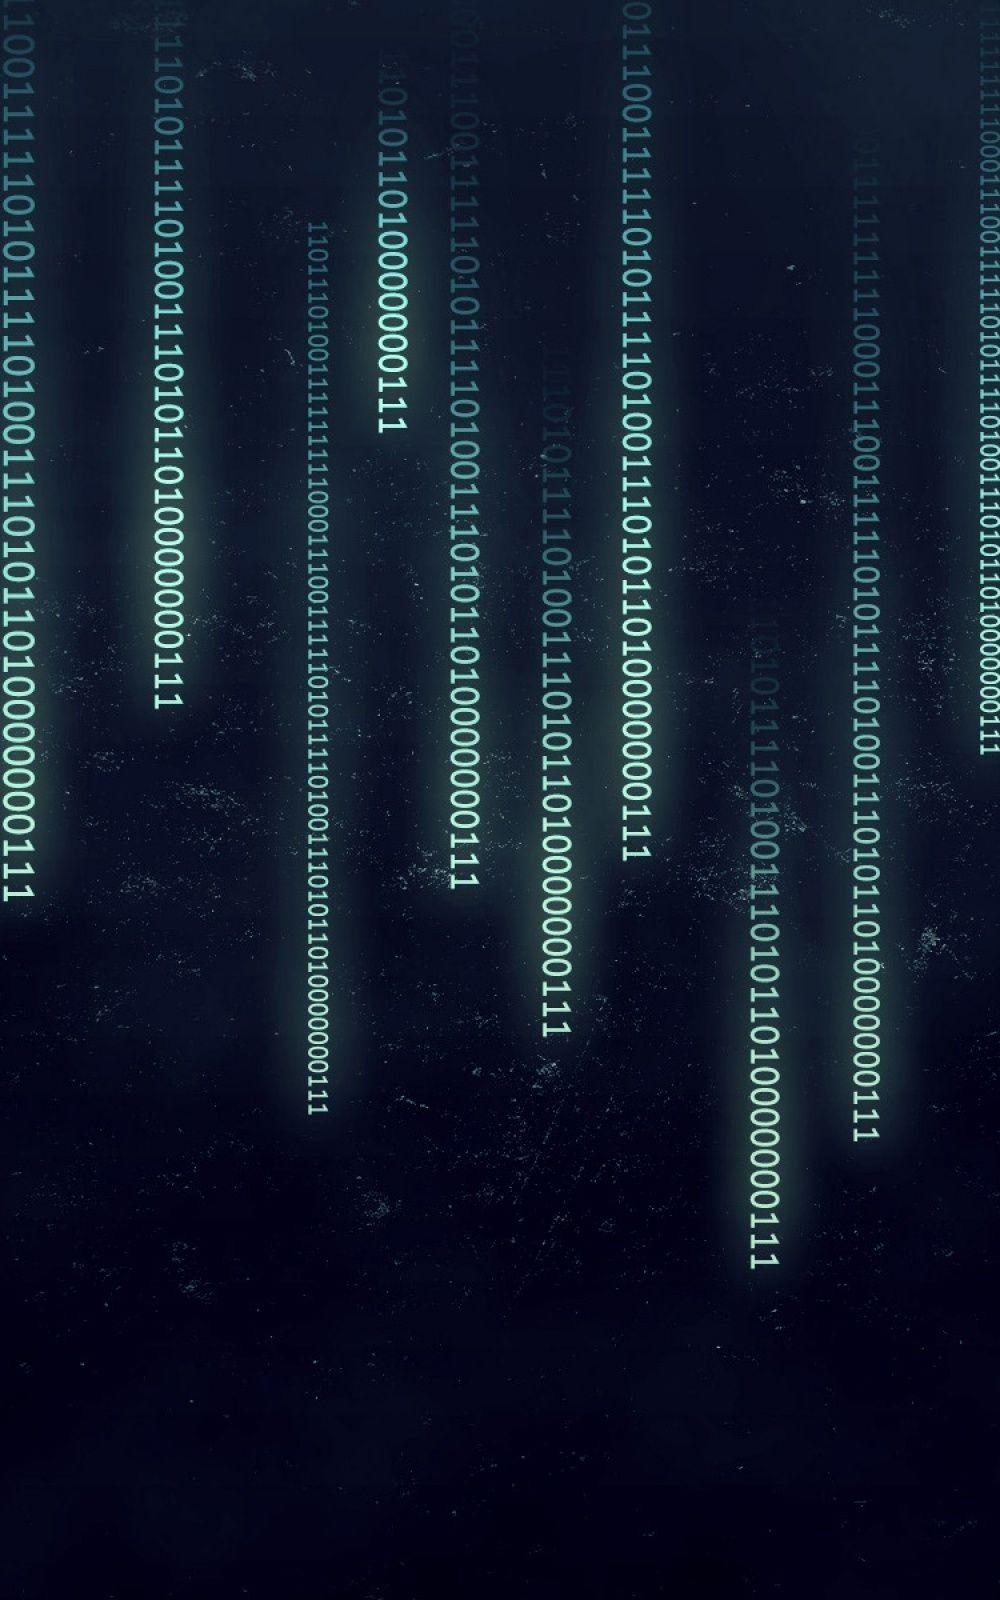 Binary Numbers Typography Matrix Android Wallpaper free download